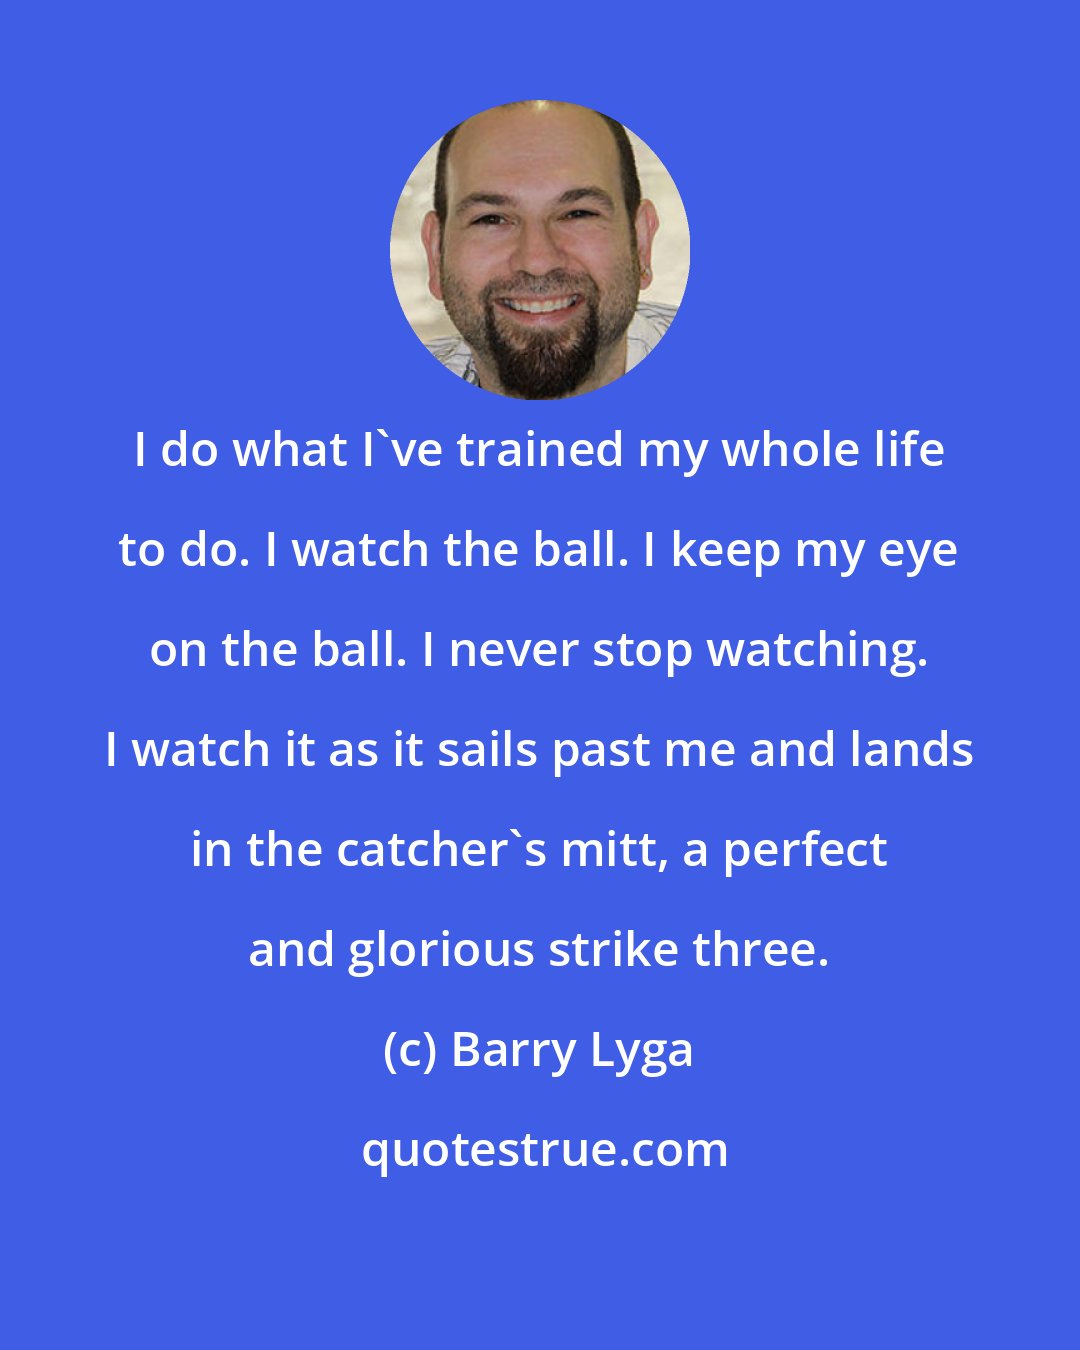 Barry Lyga: I do what I've trained my whole life to do. I watch the ball. I keep my eye on the ball. I never stop watching. I watch it as it sails past me and lands in the catcher's mitt, a perfect and glorious strike three.